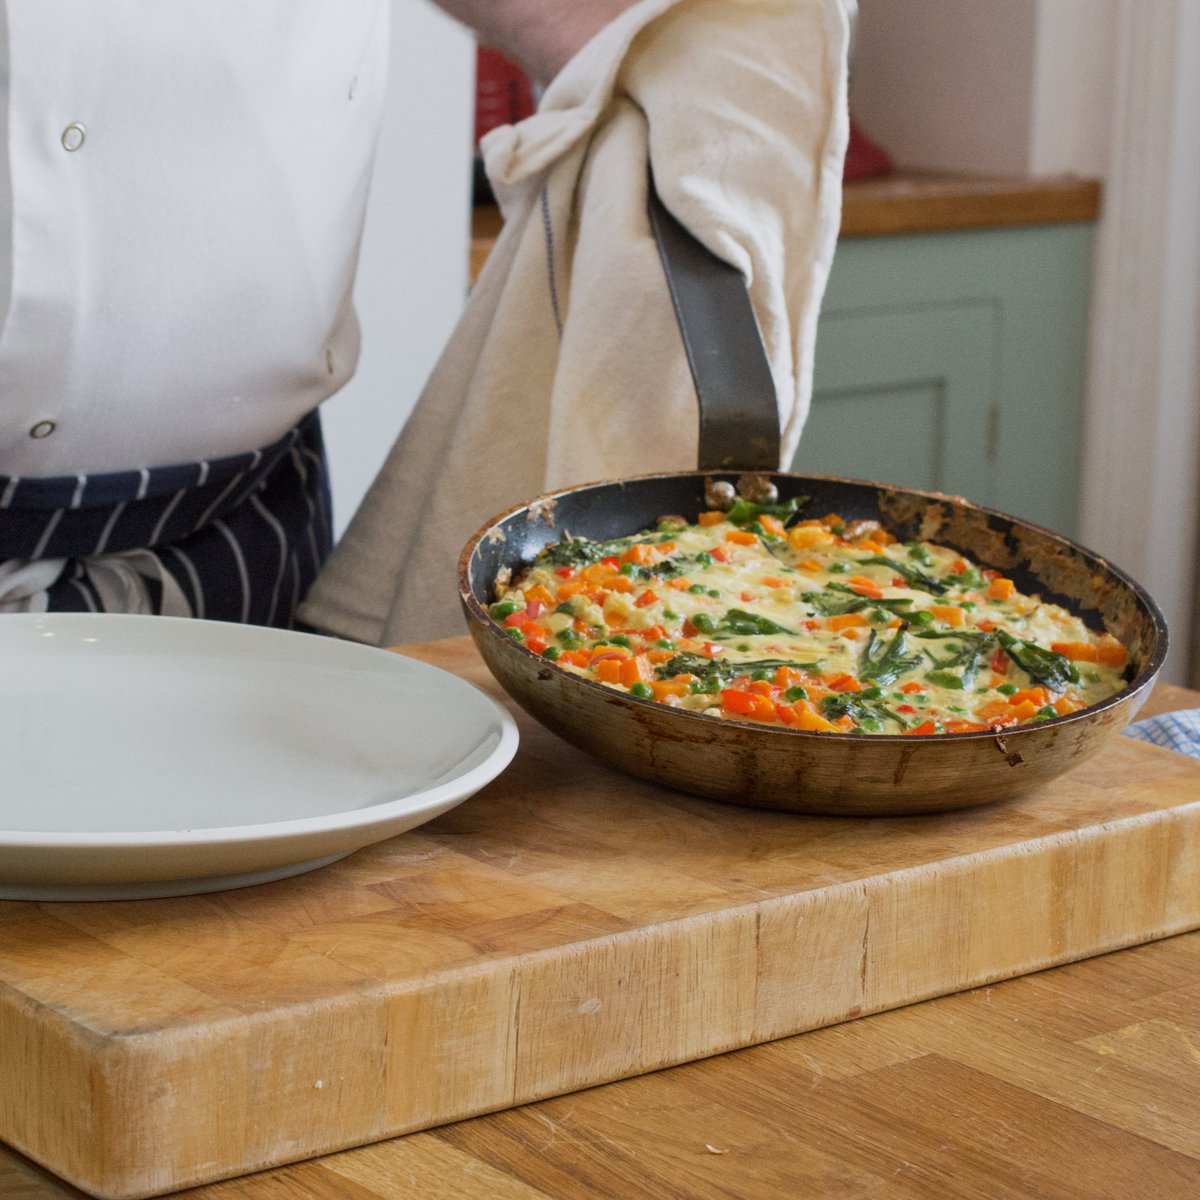 🥘 This vegetable frittata is our #KidneyKitchen #MeatFreeMonday dish. It's packed with red pepper, onion, broccoli, carrots and peas! Full recipe here: kidneycareuk.org/get-support/he… 📣 Nutrition values are calculated per serving. Consult your dietitian or doctor for right diet